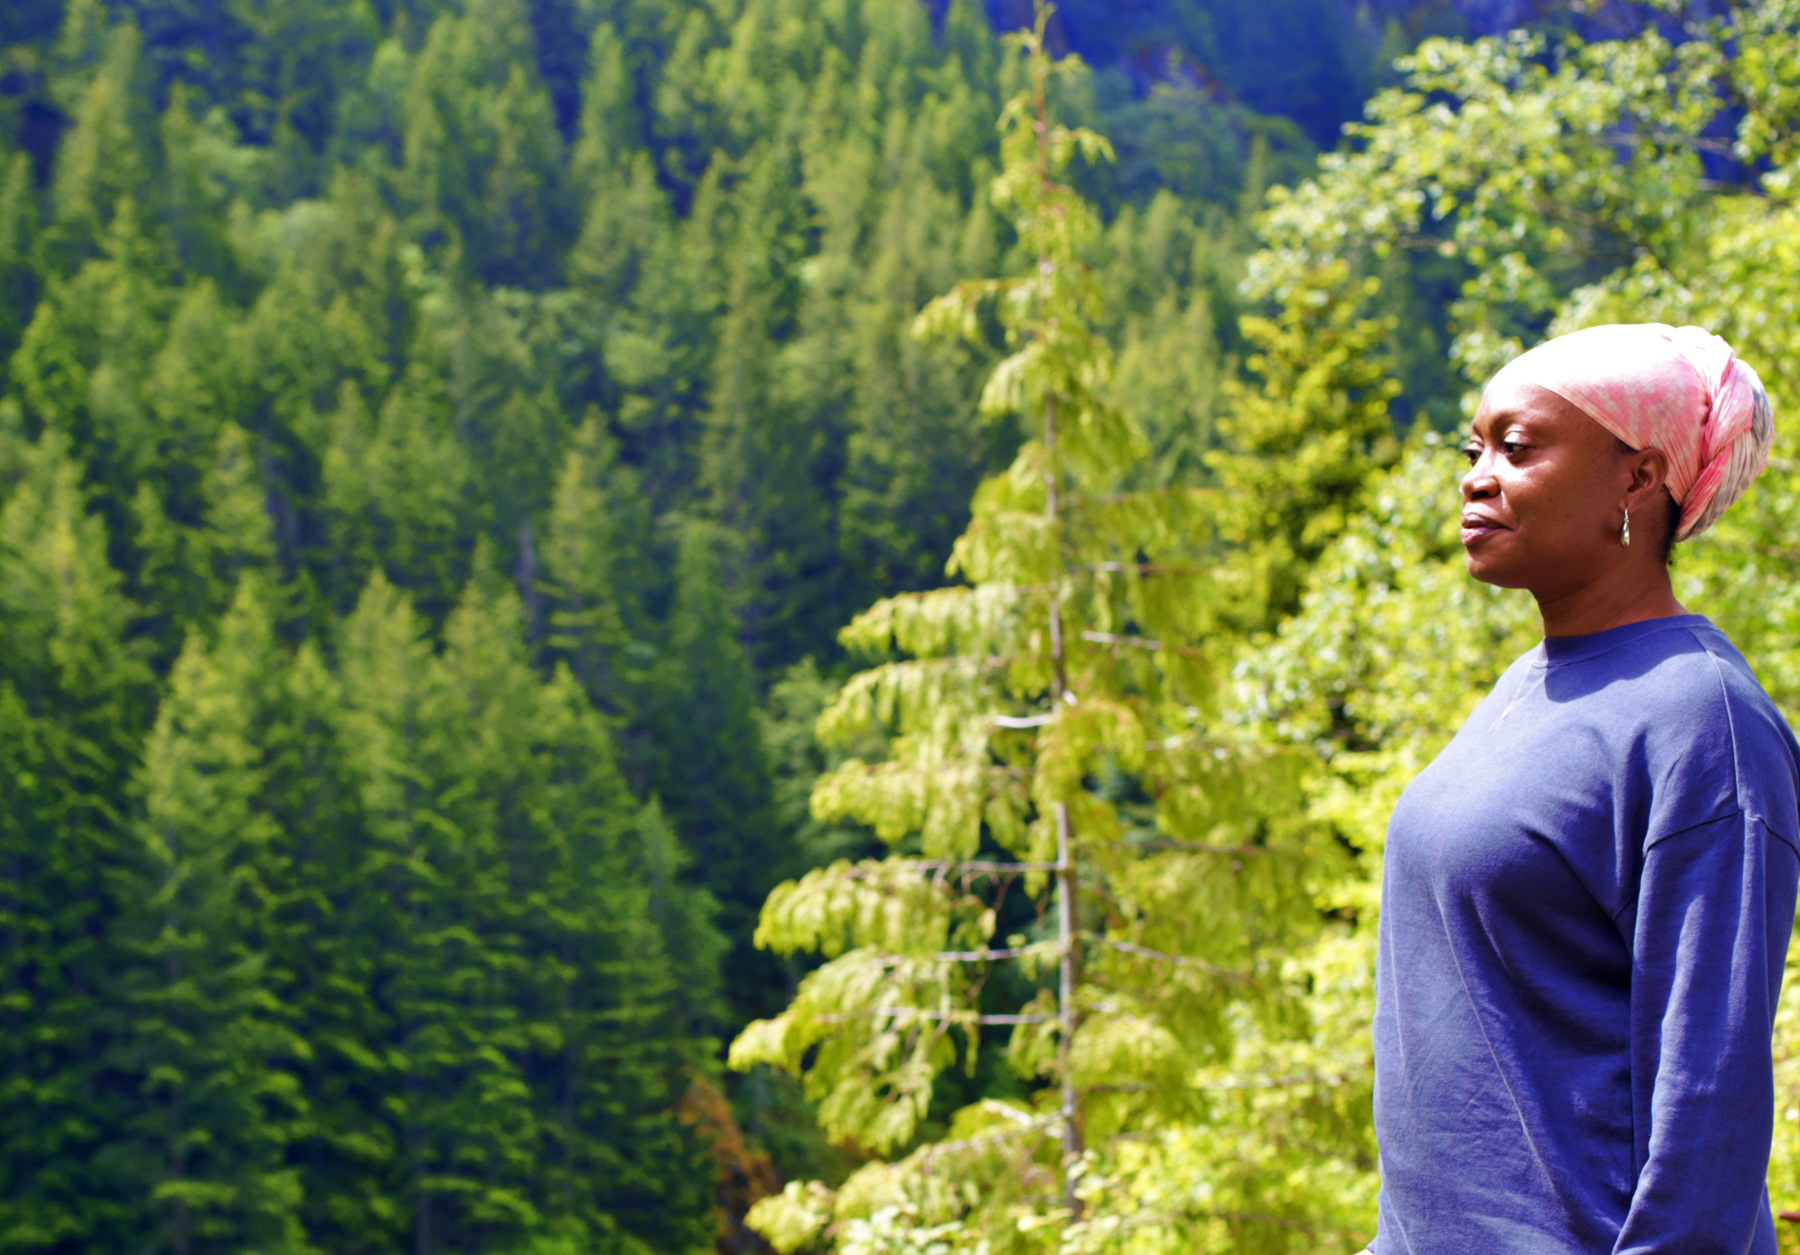 A woman admiring the view above a forest.